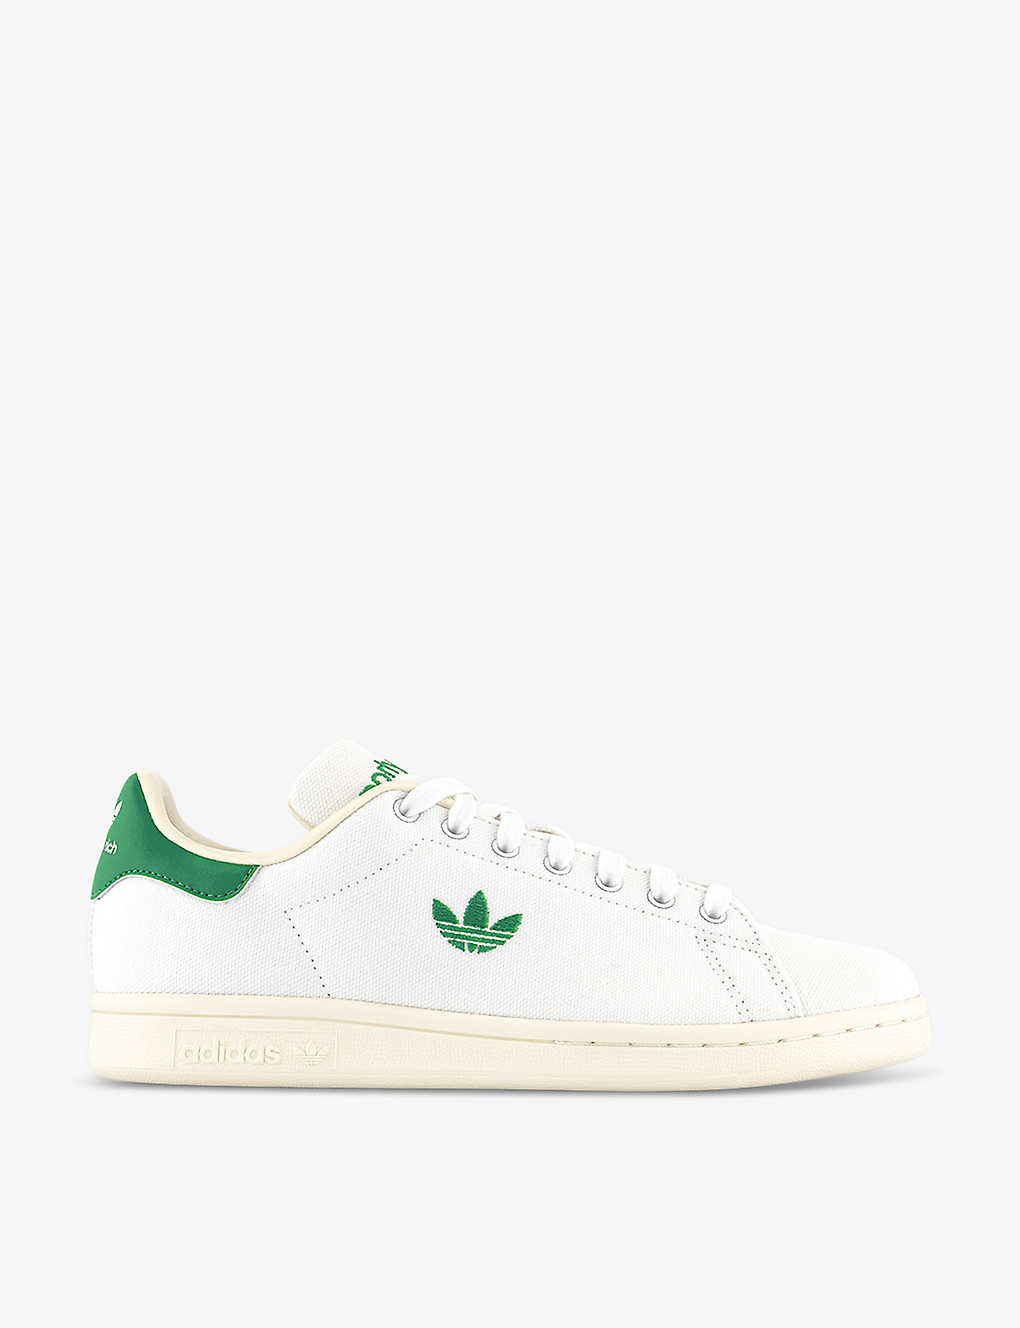 Adidas Originals Adidas X Sporty & Rich Stan Smith Canvas Low-top Trainers In Sporty White Green Off W